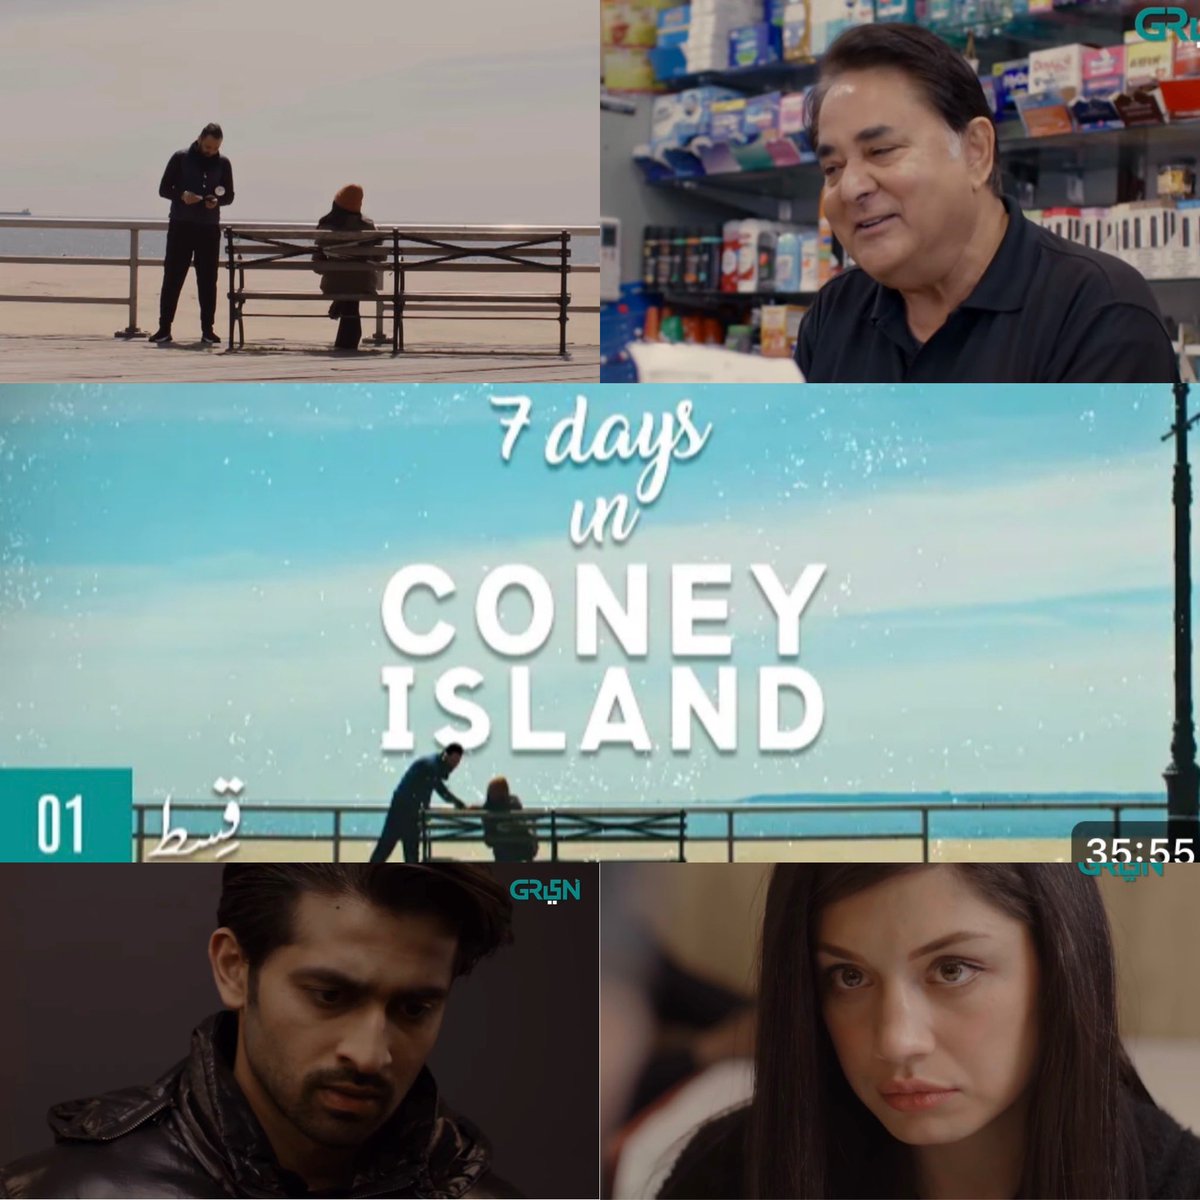 It has flaws, but the 1st episode leaves a positive impression. It has the Mehreen Jabbar touch and an intriguing story. #7DaysInConeyIsland touches upon immigrant hardships, casual racism, cultural hypocrisy, diffs in social norms/mindsets - a lot to appreciate!#PakistaniDramas